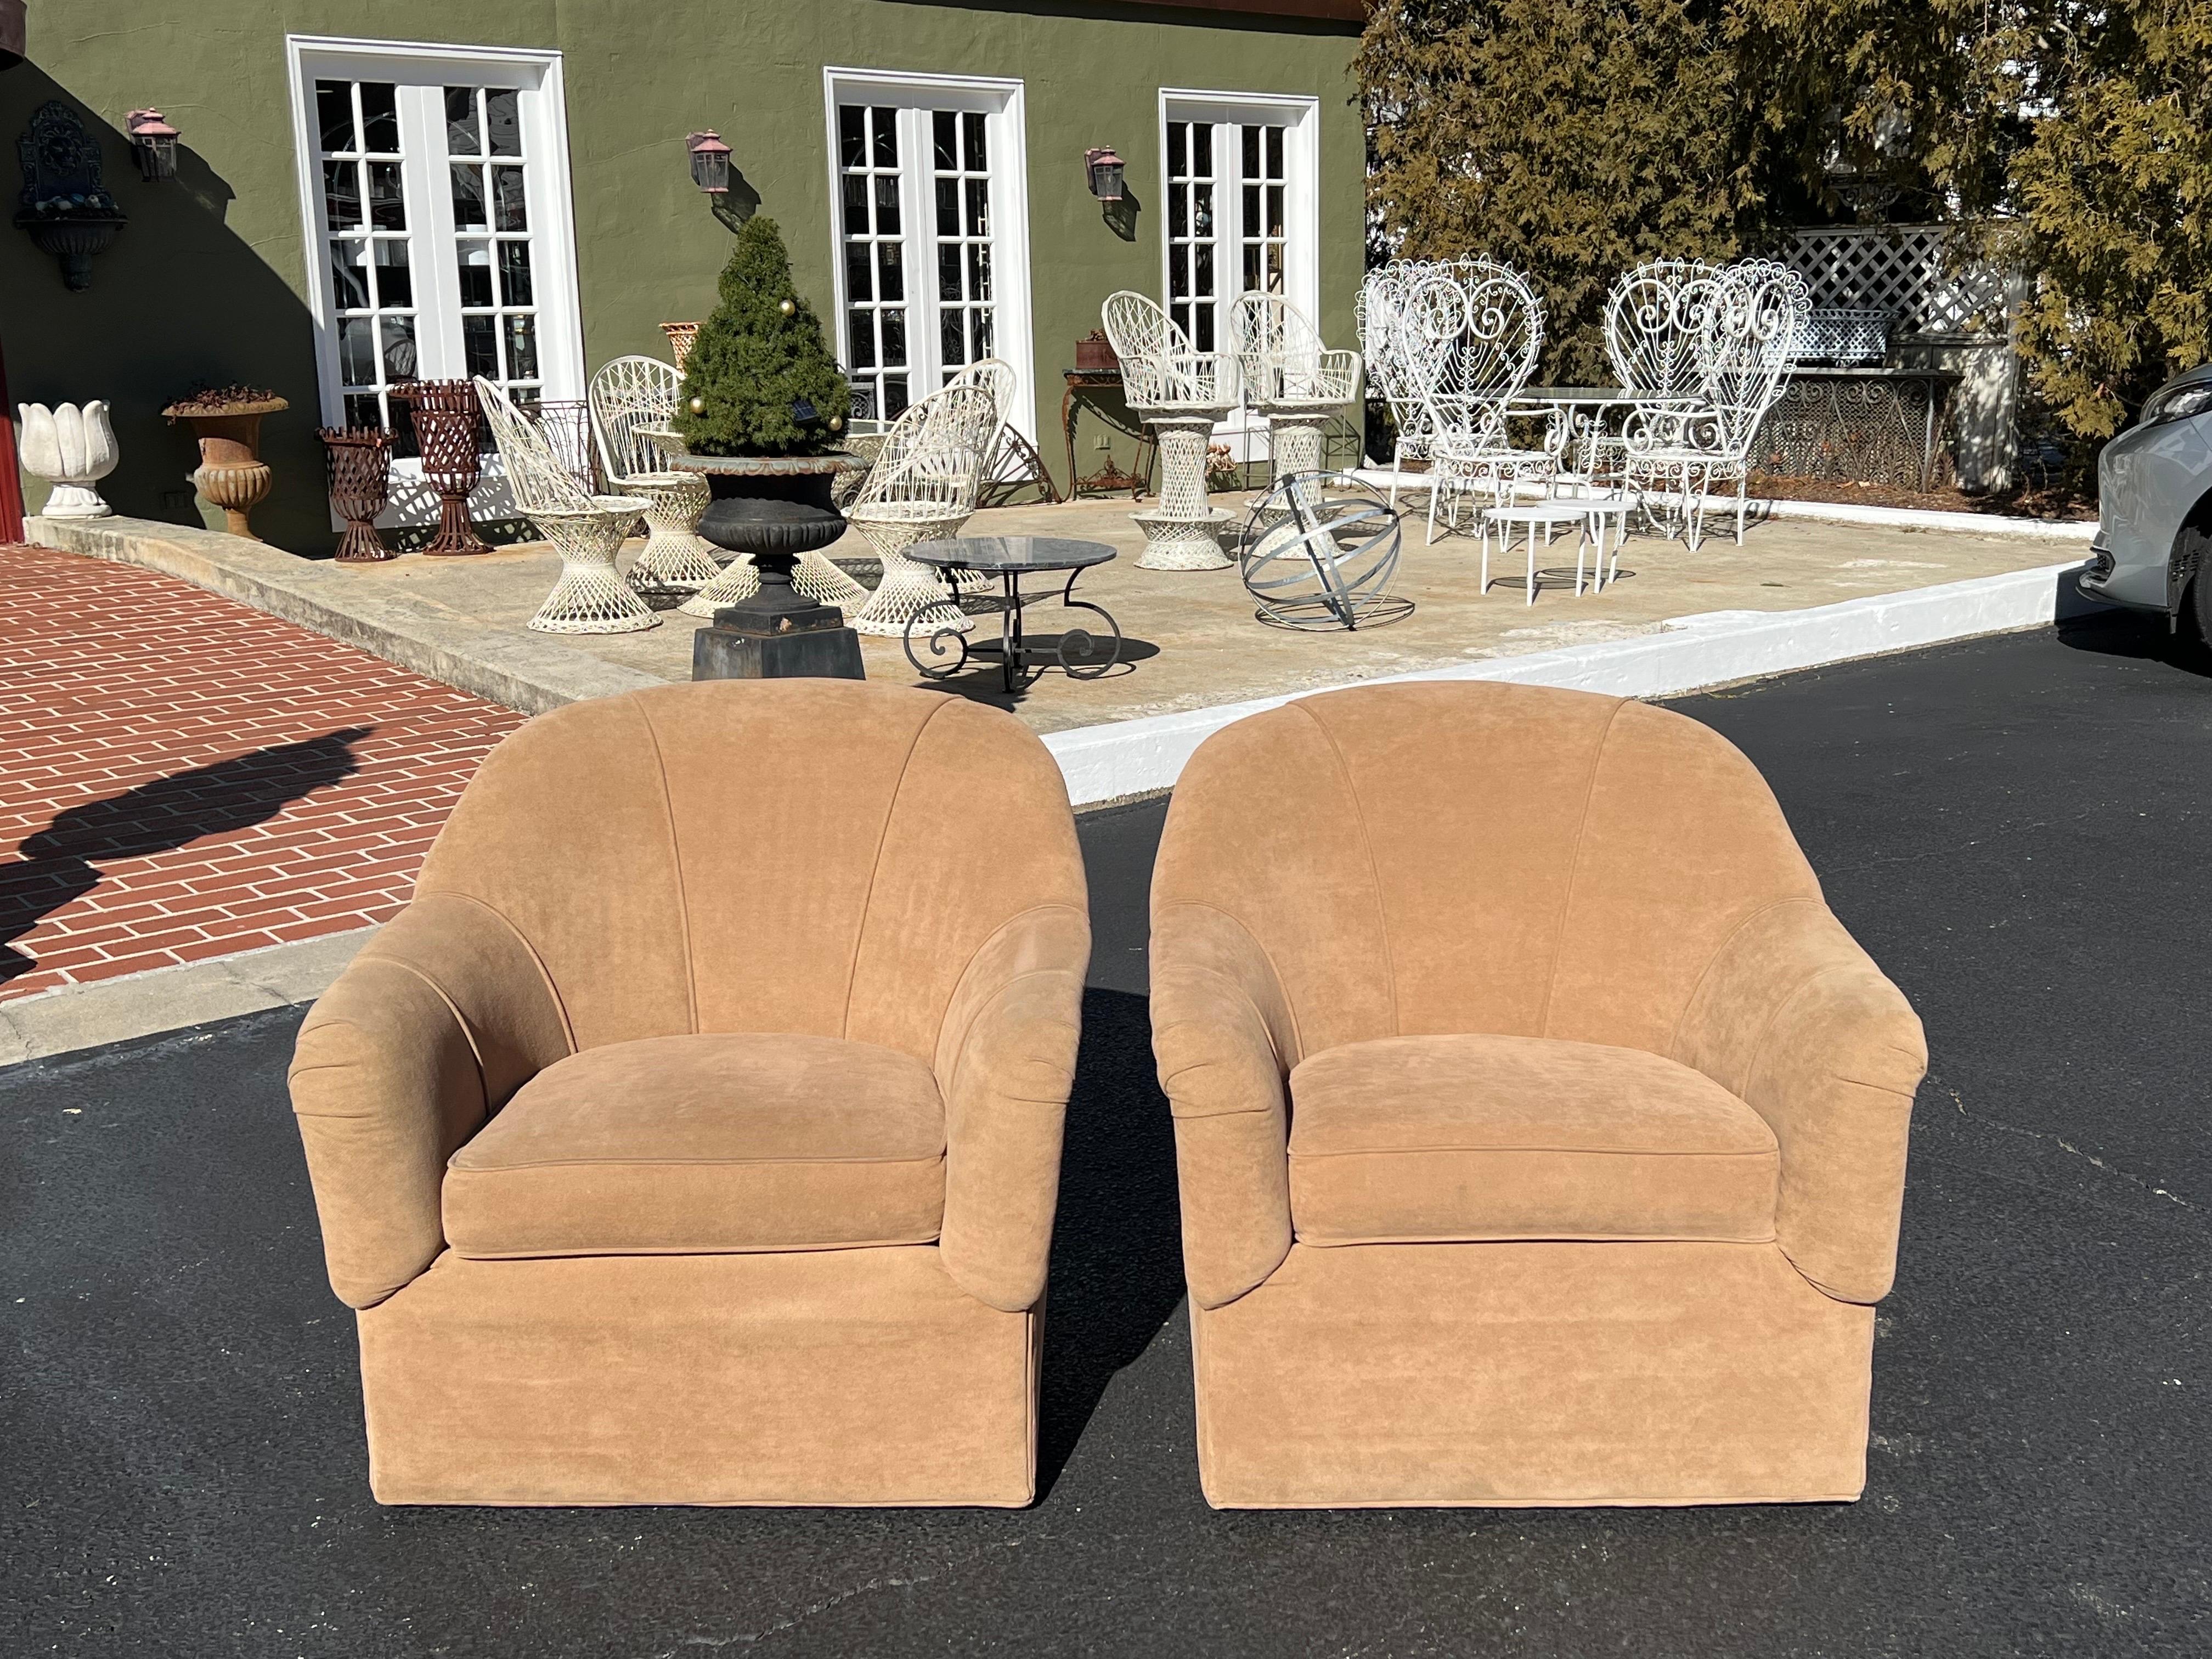 Pair of Ethan Allen Swivel chairs. Classic, normal sized, cube chairs with swivel base. 
High quality all around. Super comfortabel for any body size. Very durable chenilee type fabric in a camel color. Ready to use as is or recover to your